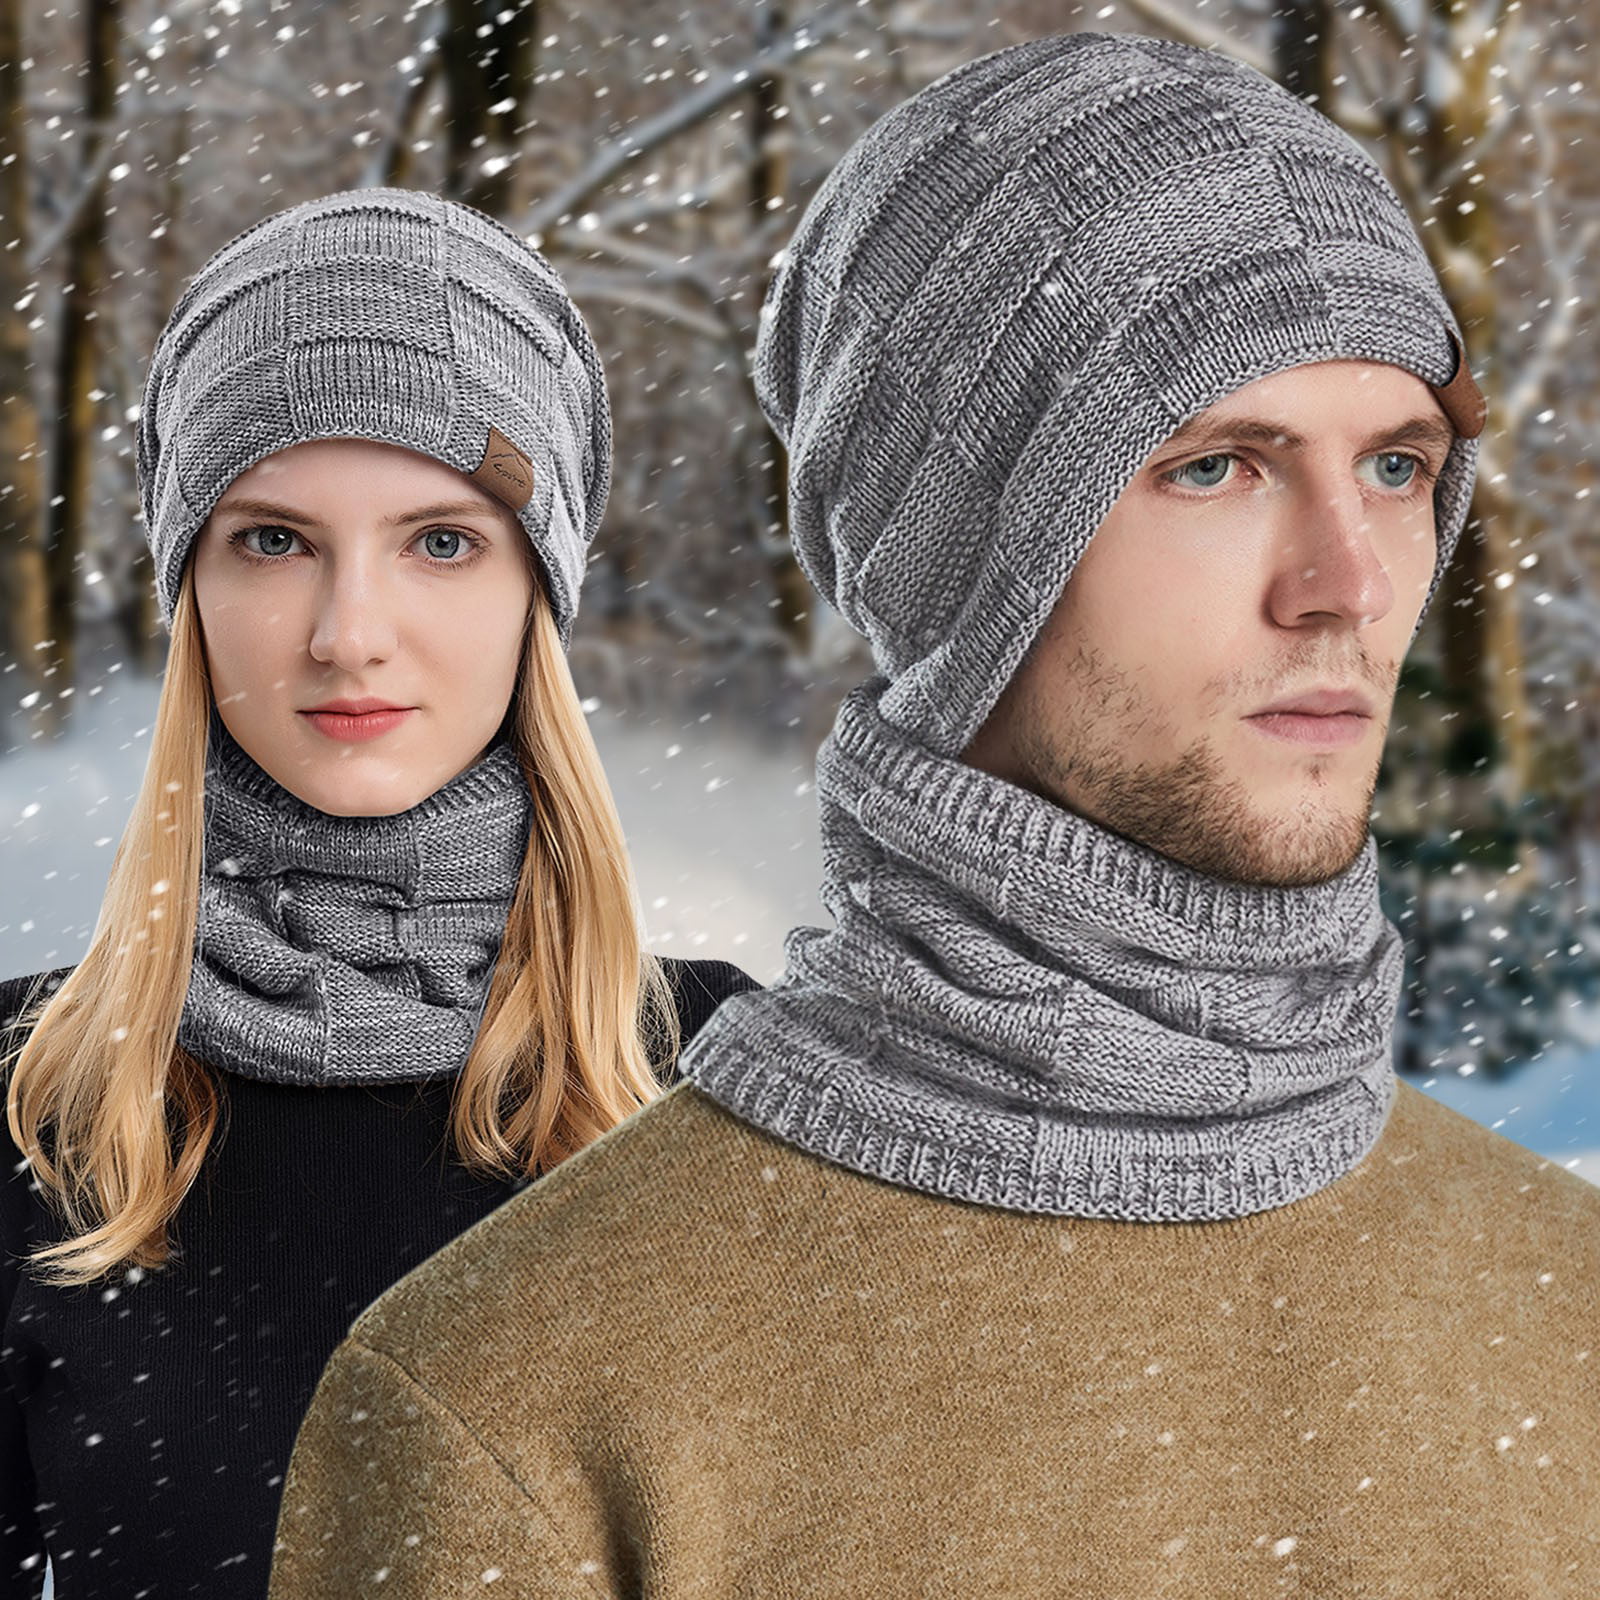 Solid Color One-piece Knit Hat Scarf, Windproof & Coldproof Winter